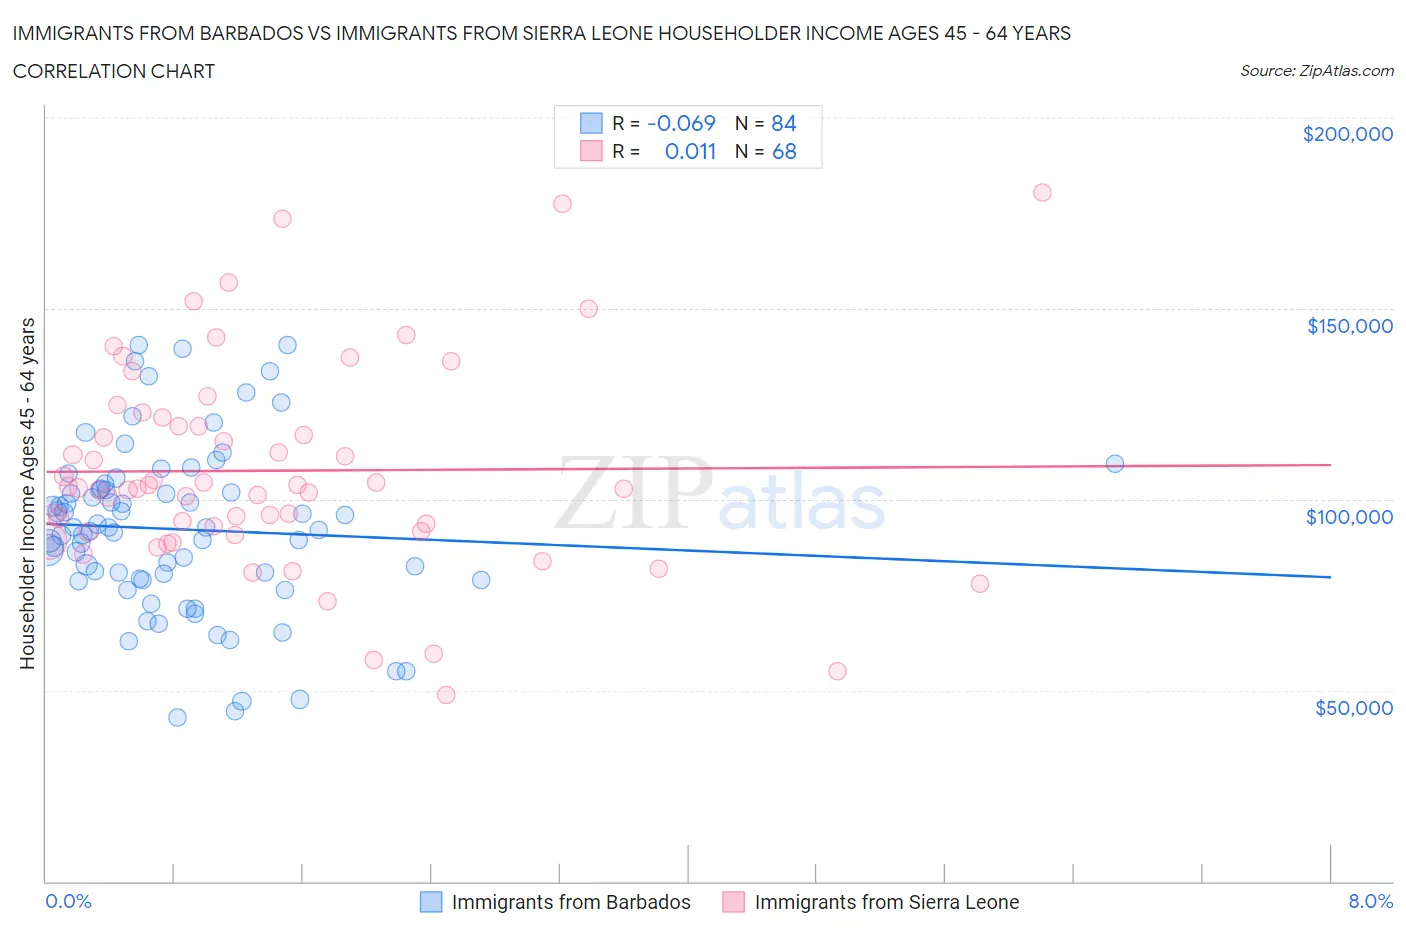 Immigrants from Barbados vs Immigrants from Sierra Leone Householder Income Ages 45 - 64 years